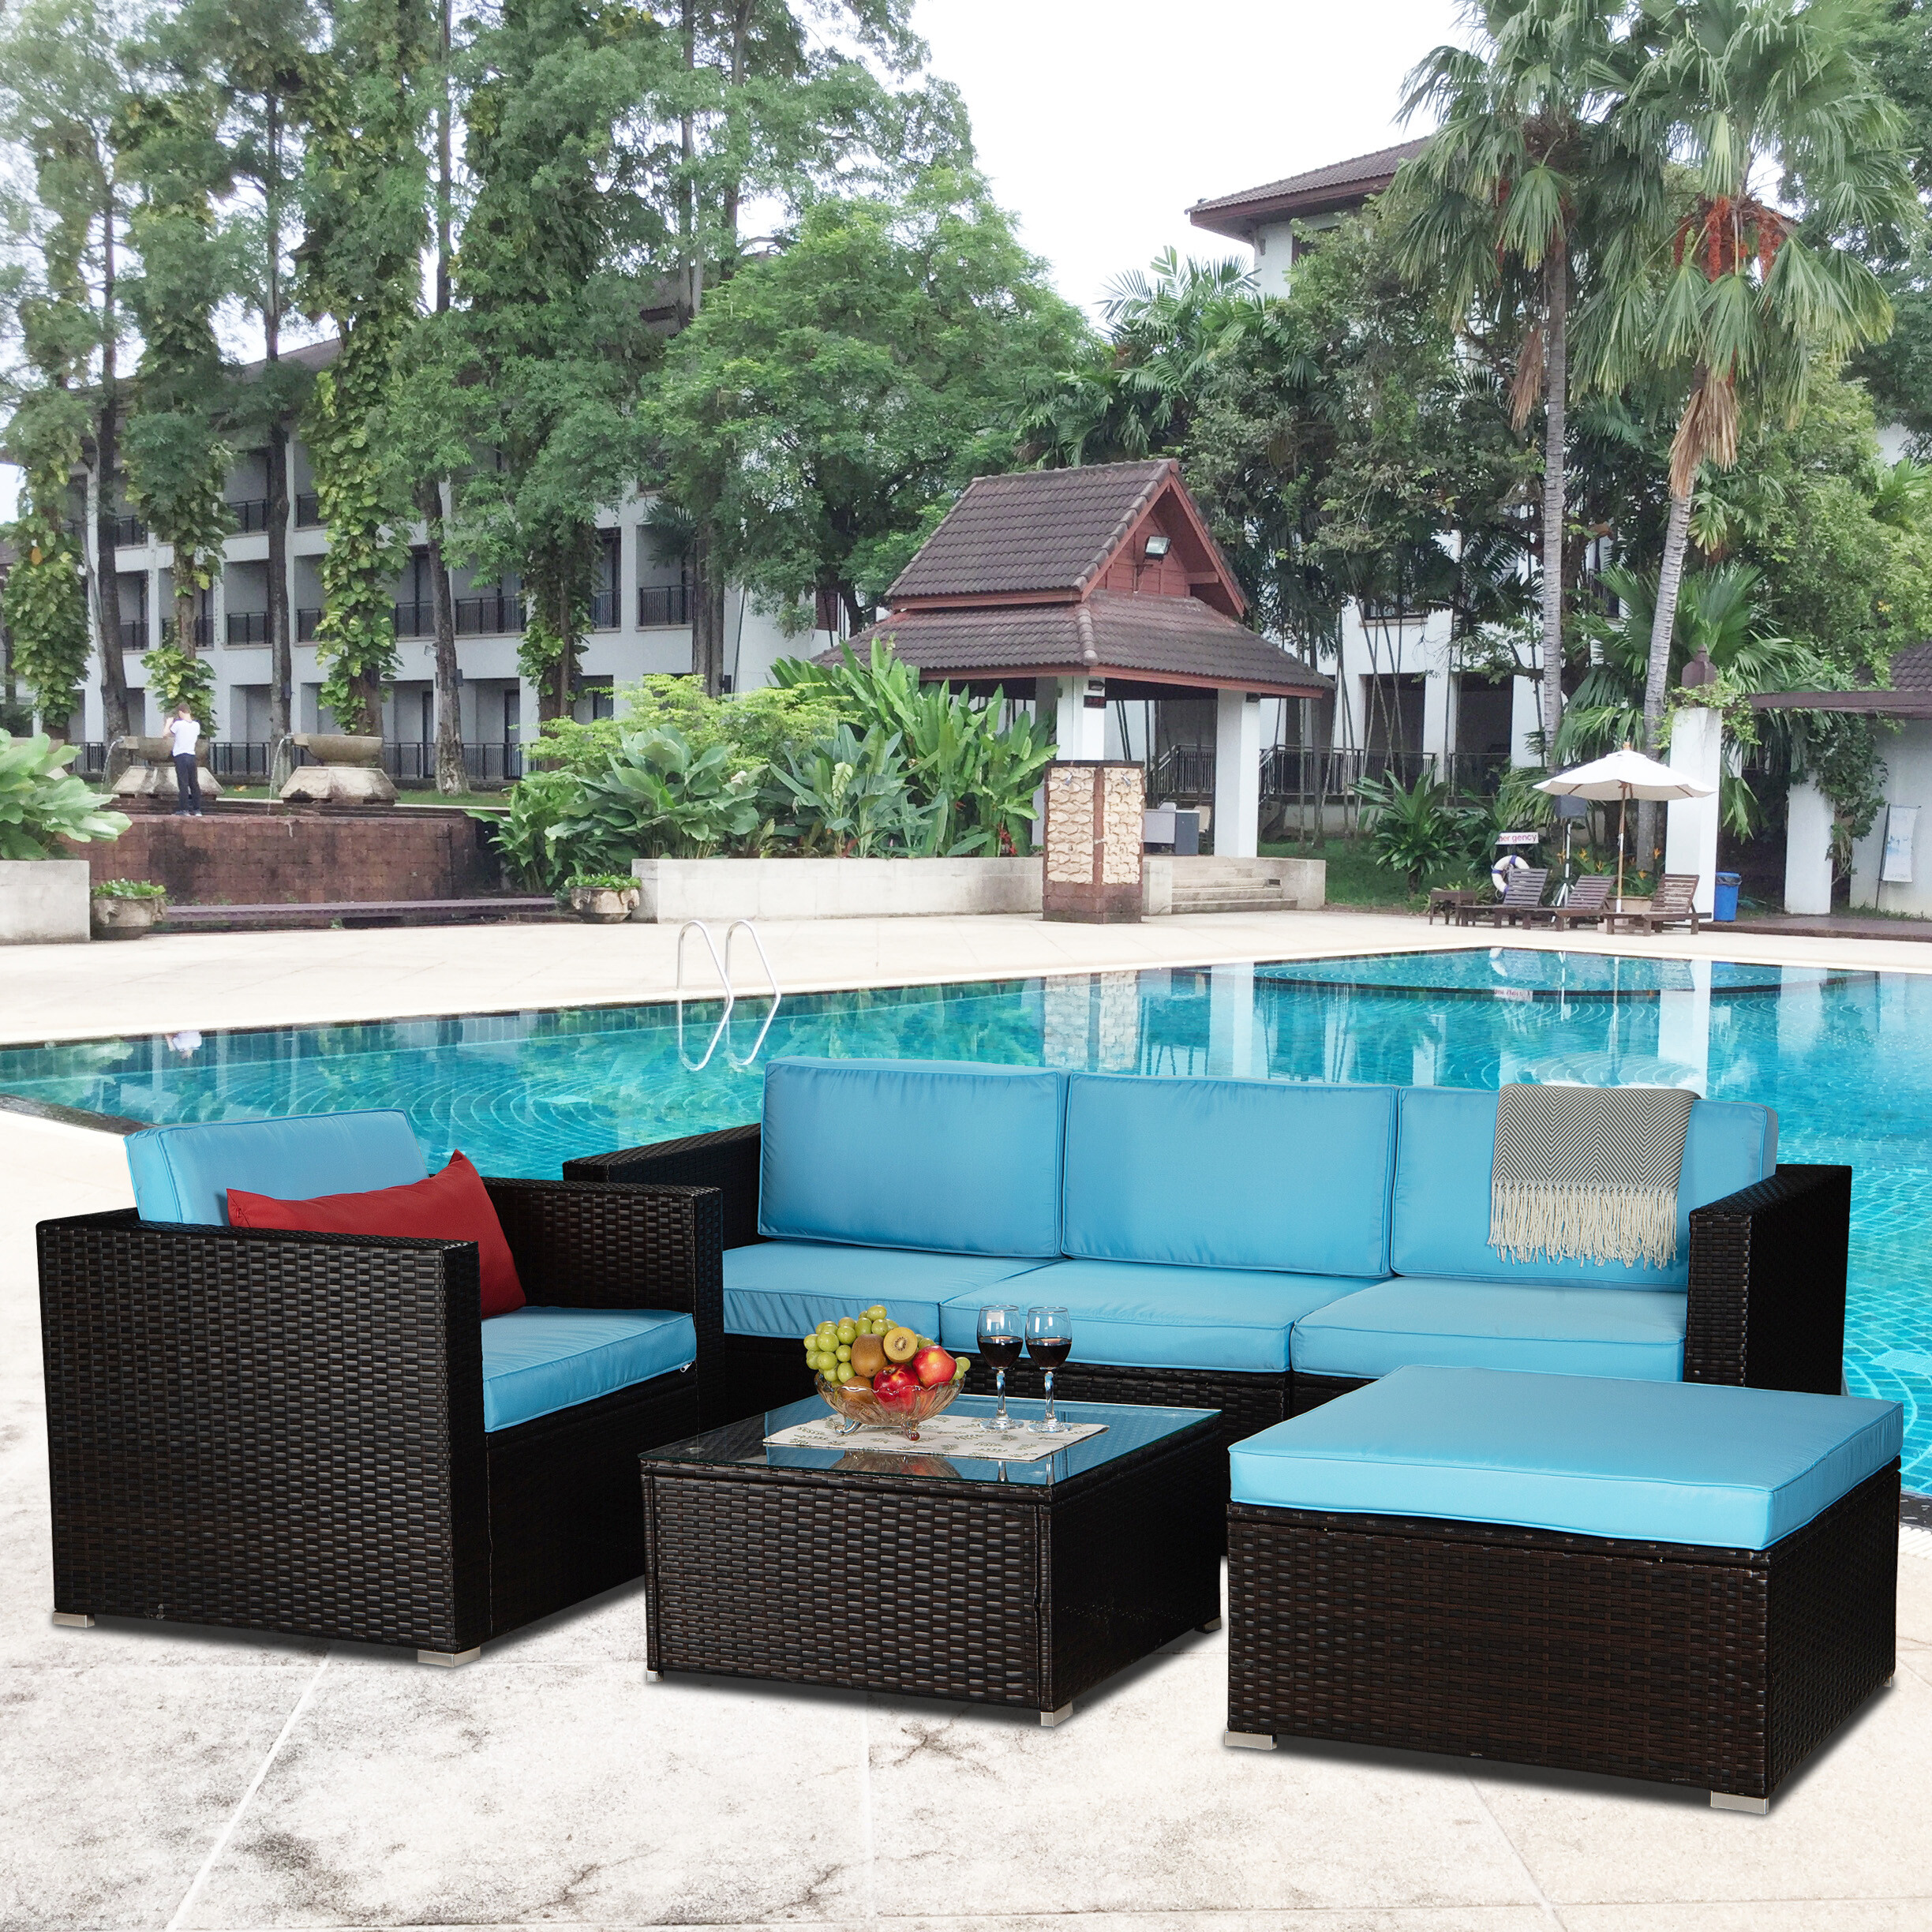 6-Piece Outdoor Patio Furniture Set PE Rattan Wicker Sectional Sofa Set with Coffee Table, Blue Cushioned and Red Pillow - image 1 of 8